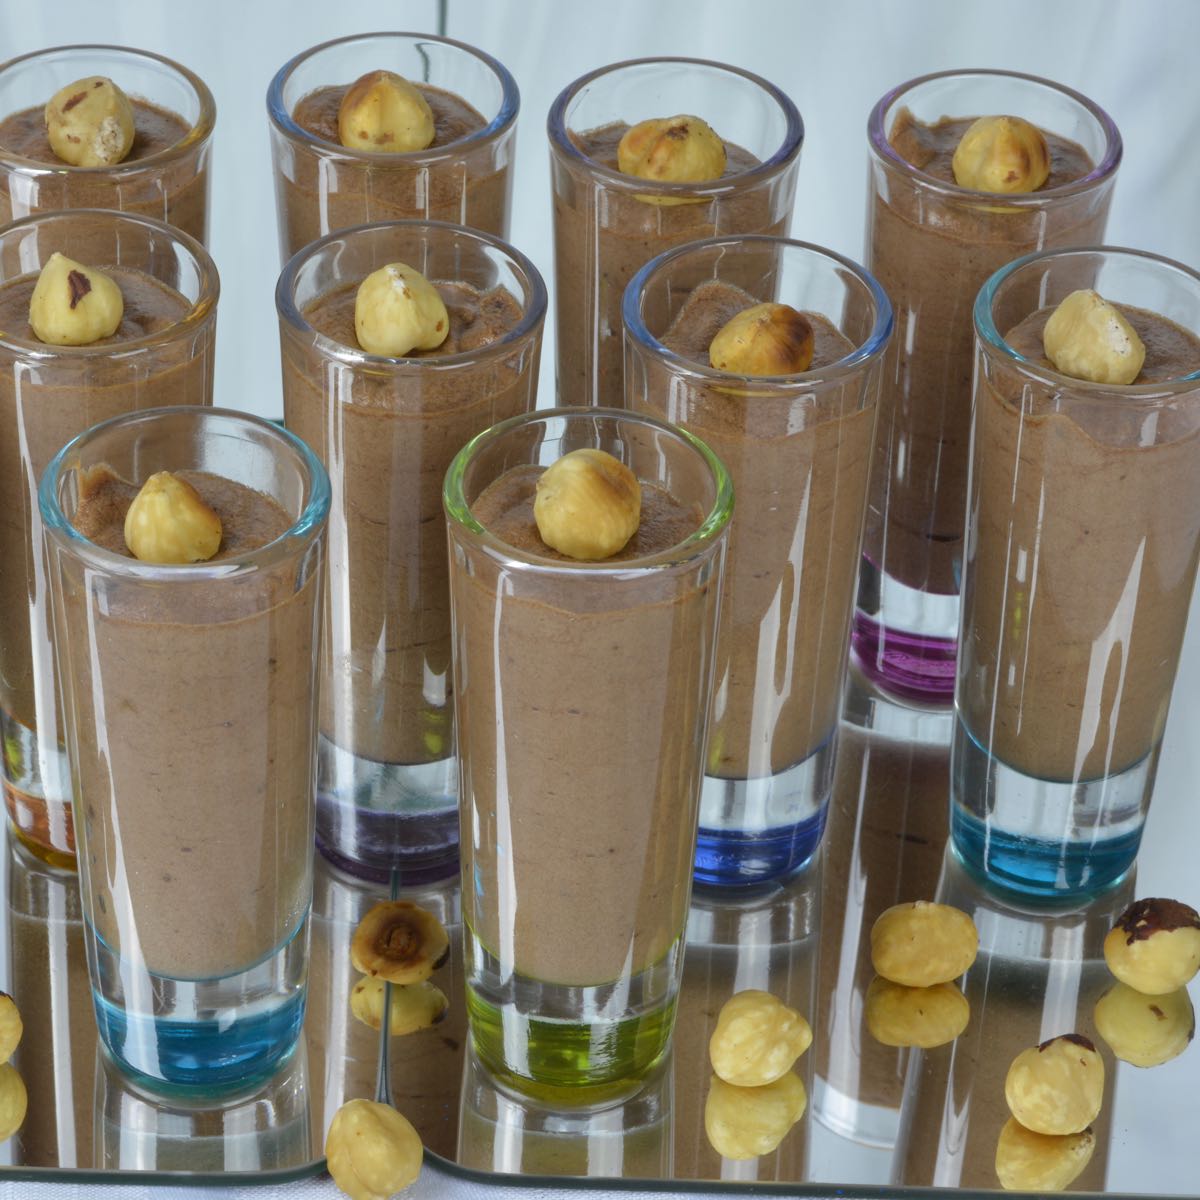 Ten Nutella Mousse shots each topped with a toasted hazelnut.